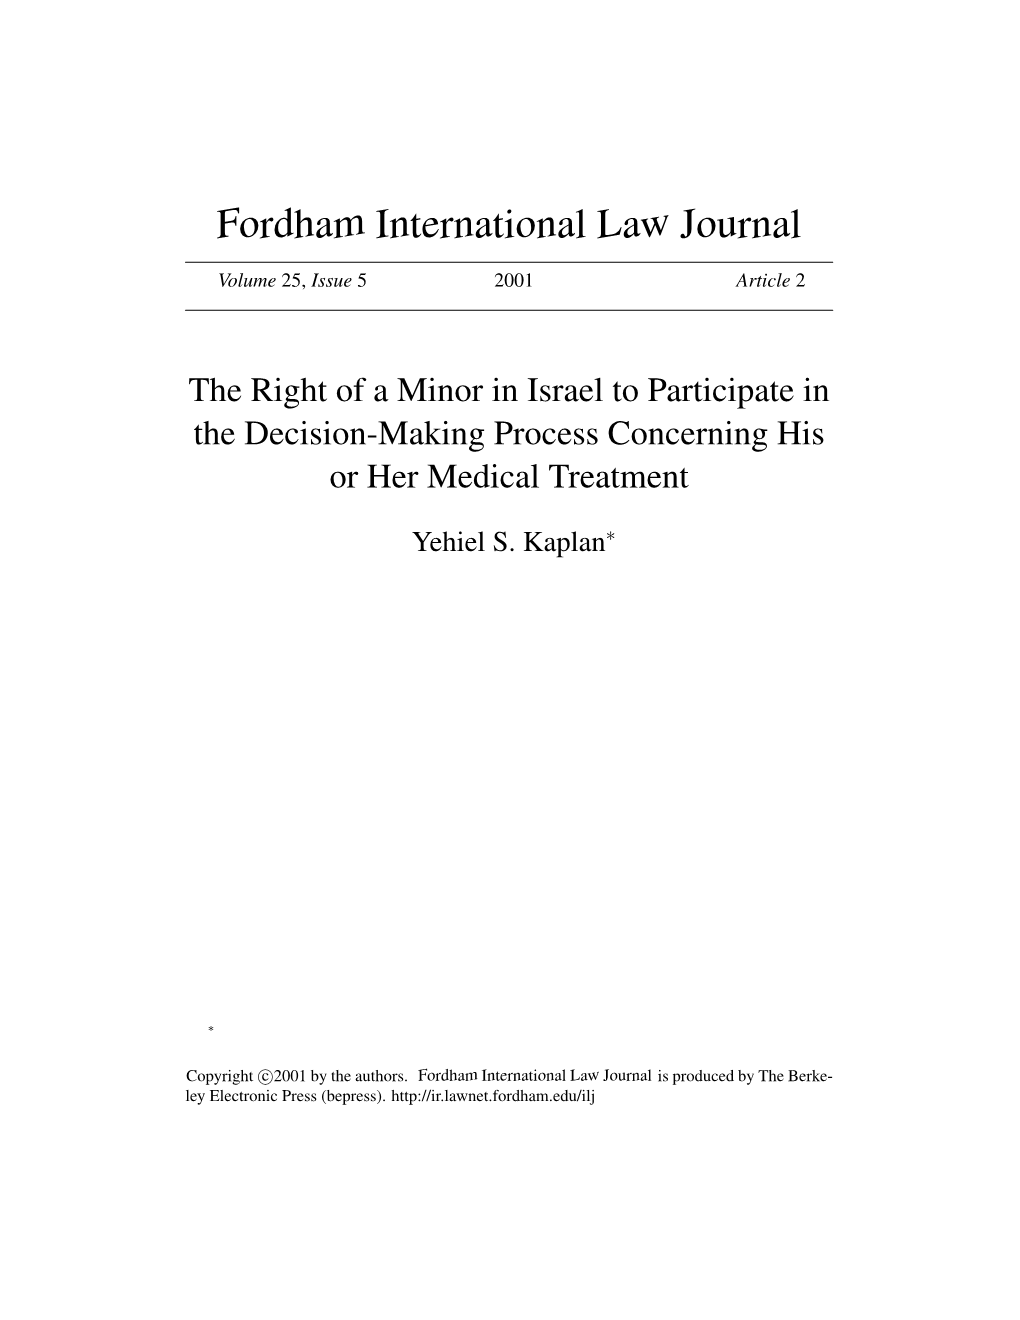 The Right of a Minor in Israel to Participate in the Decision-Making Process Concerning His Or Her Medical Treatment